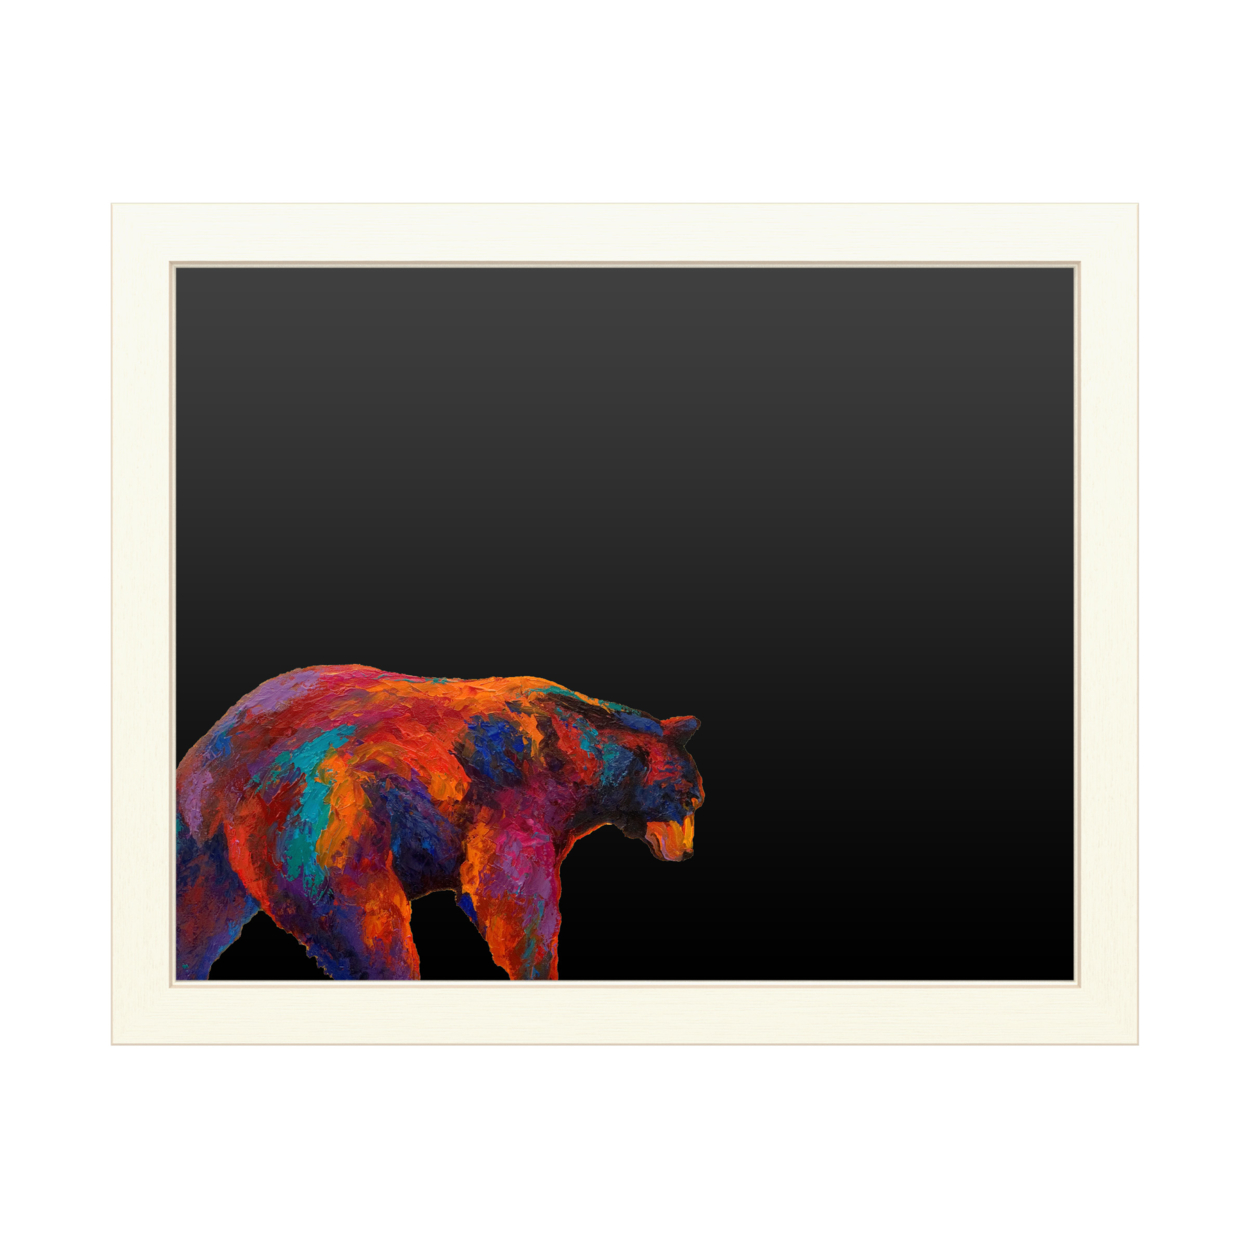 16 X 20 Chalk Board With Printed Artwork - Marion Rose Daily Rounds Black Bear White Board - Ready To Hang Chalkboard